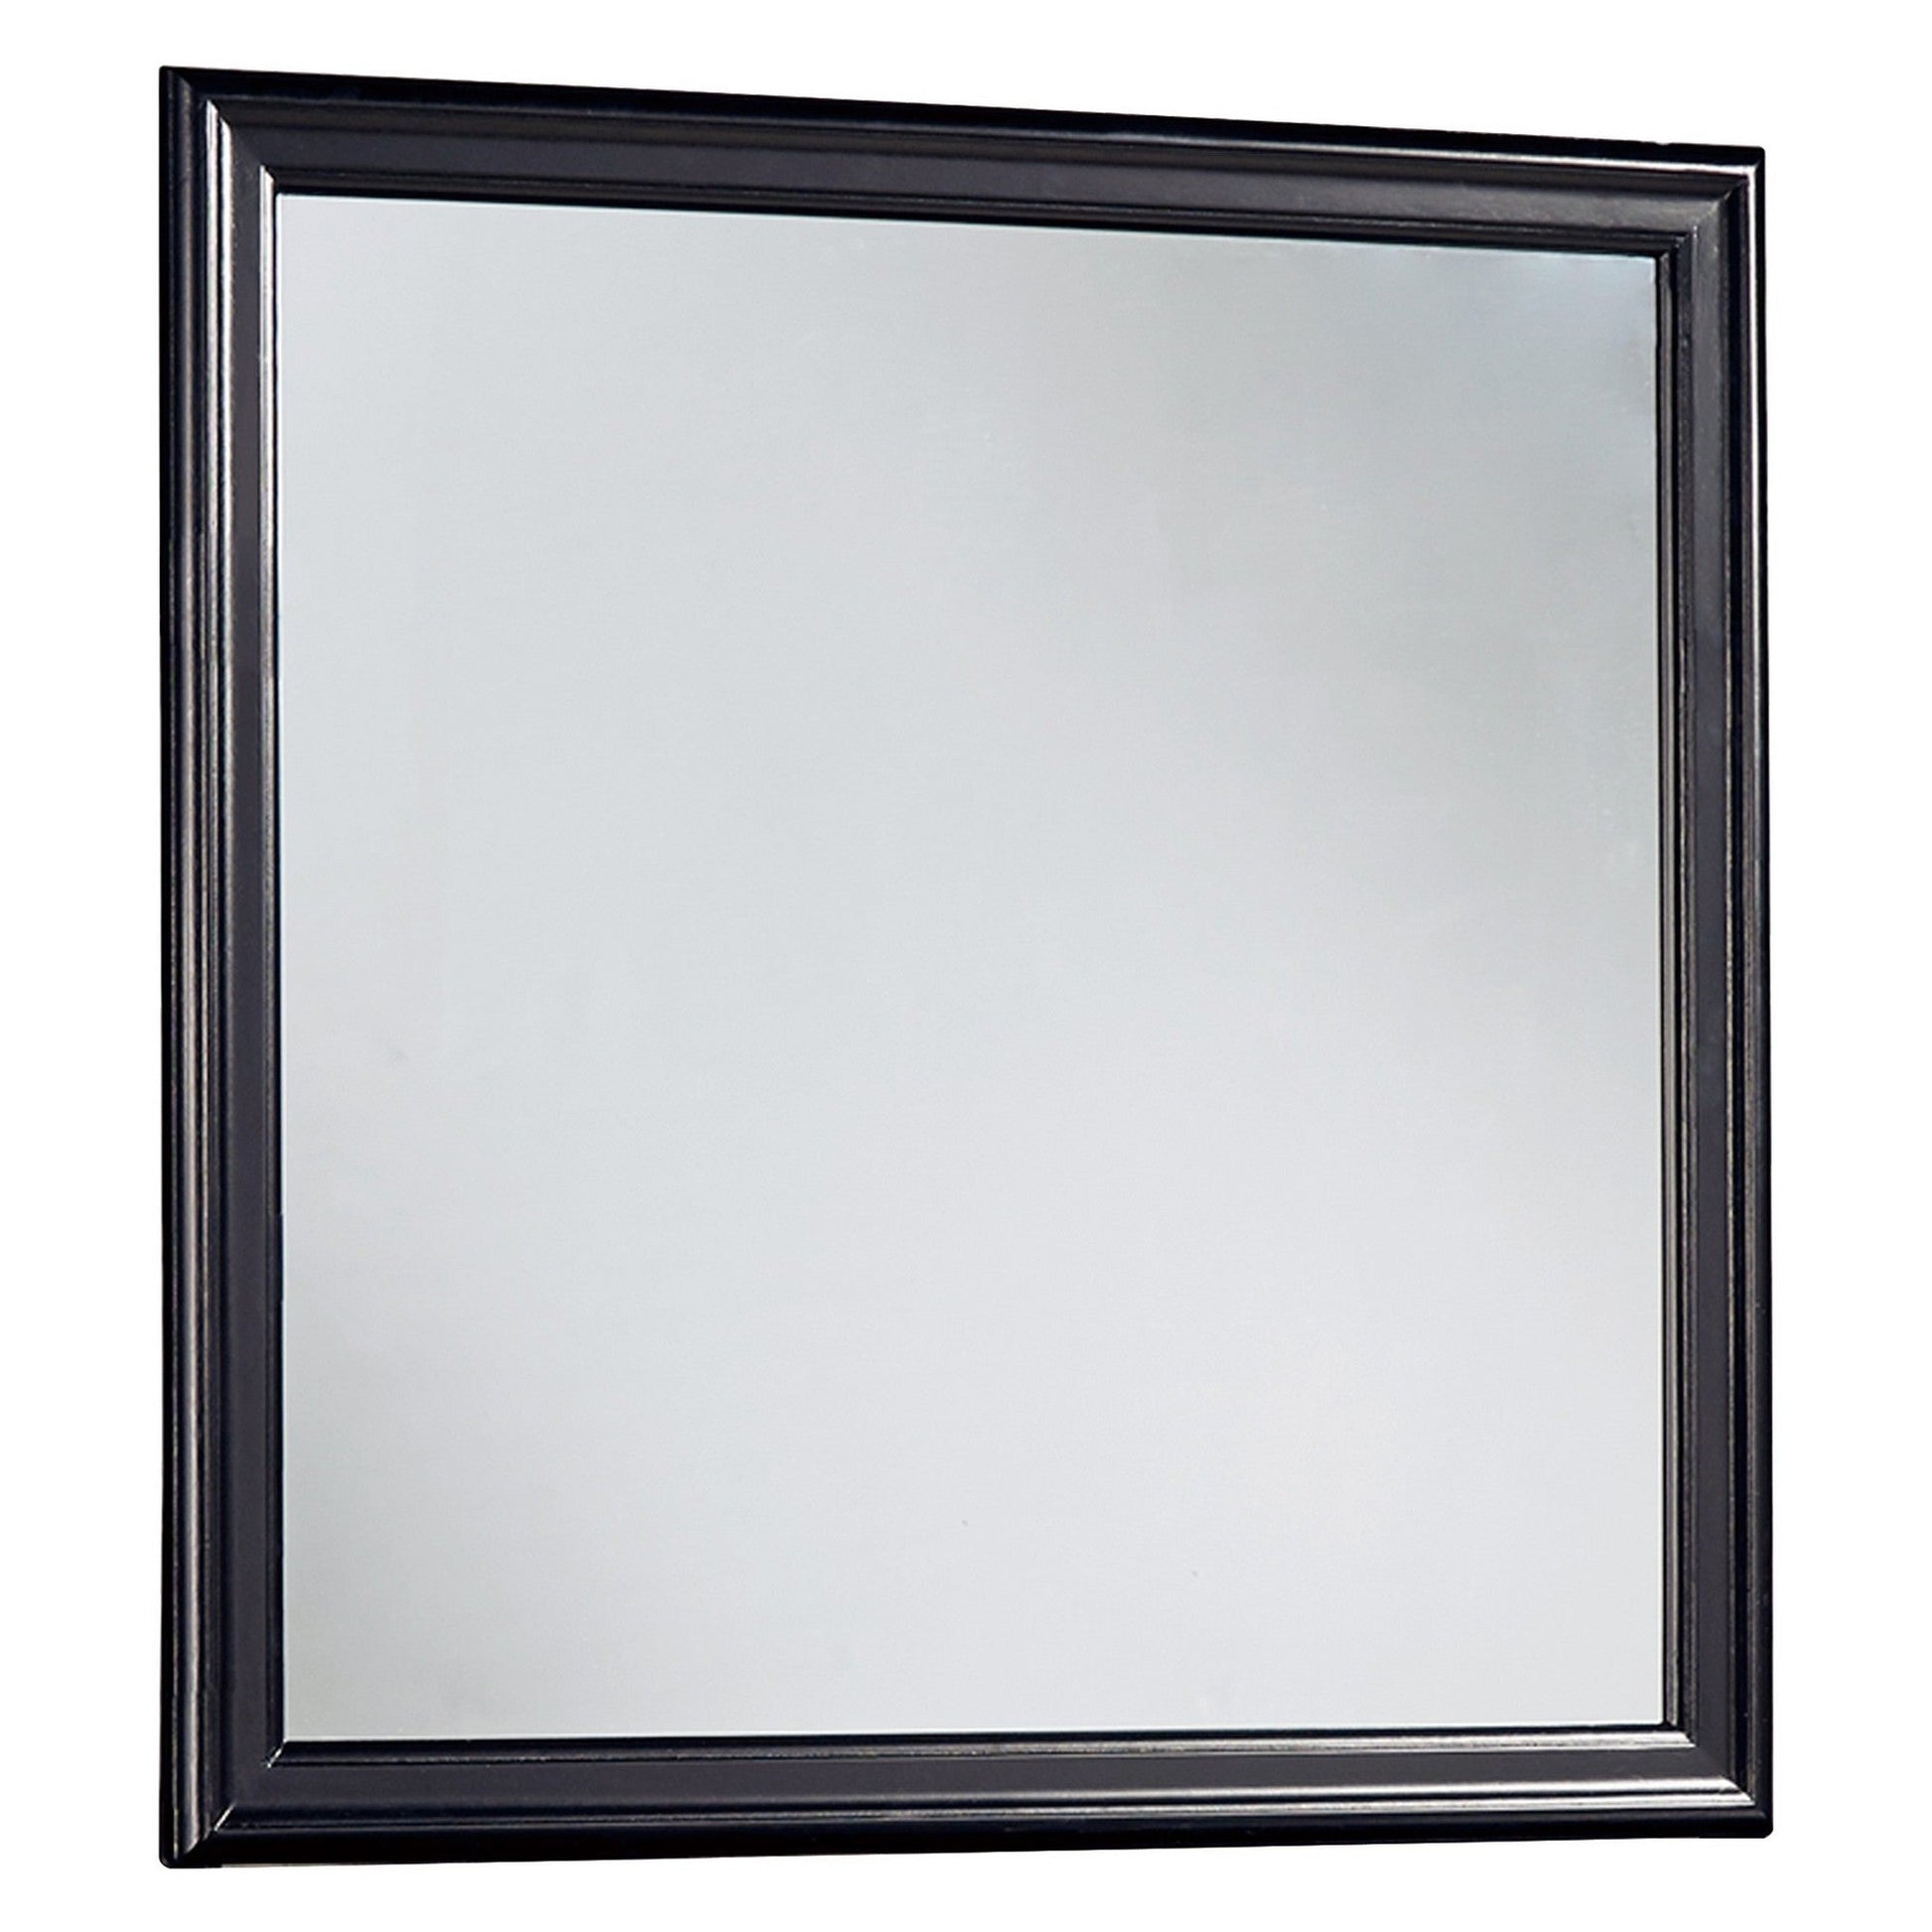 Benzara Black and Silver Wooden Frame Mirror With Mounting Hardware